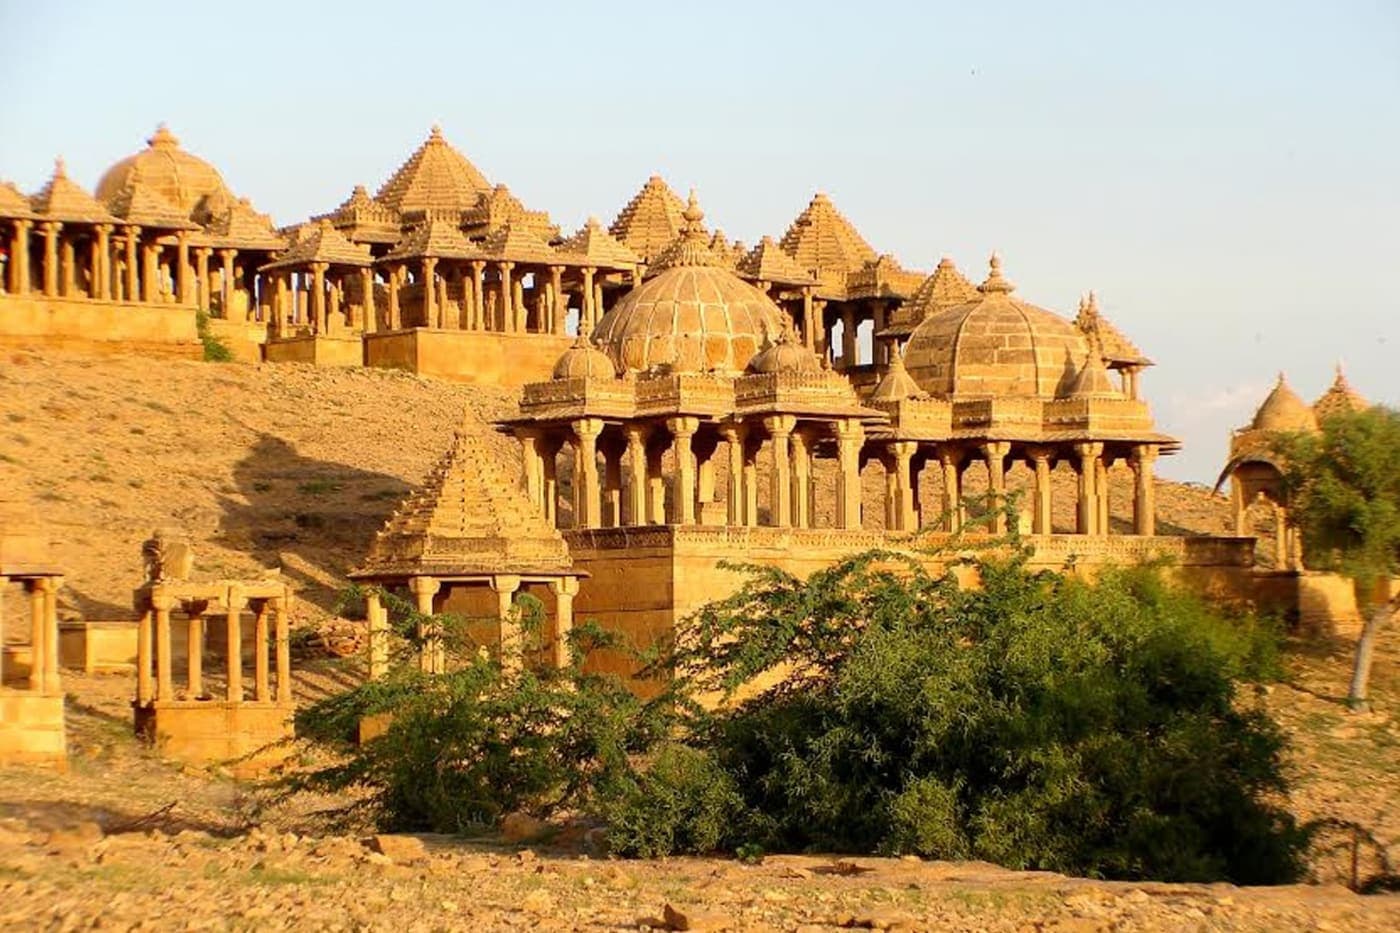 Photo of Sonar Fort popularly known as Jaisalmer Fort